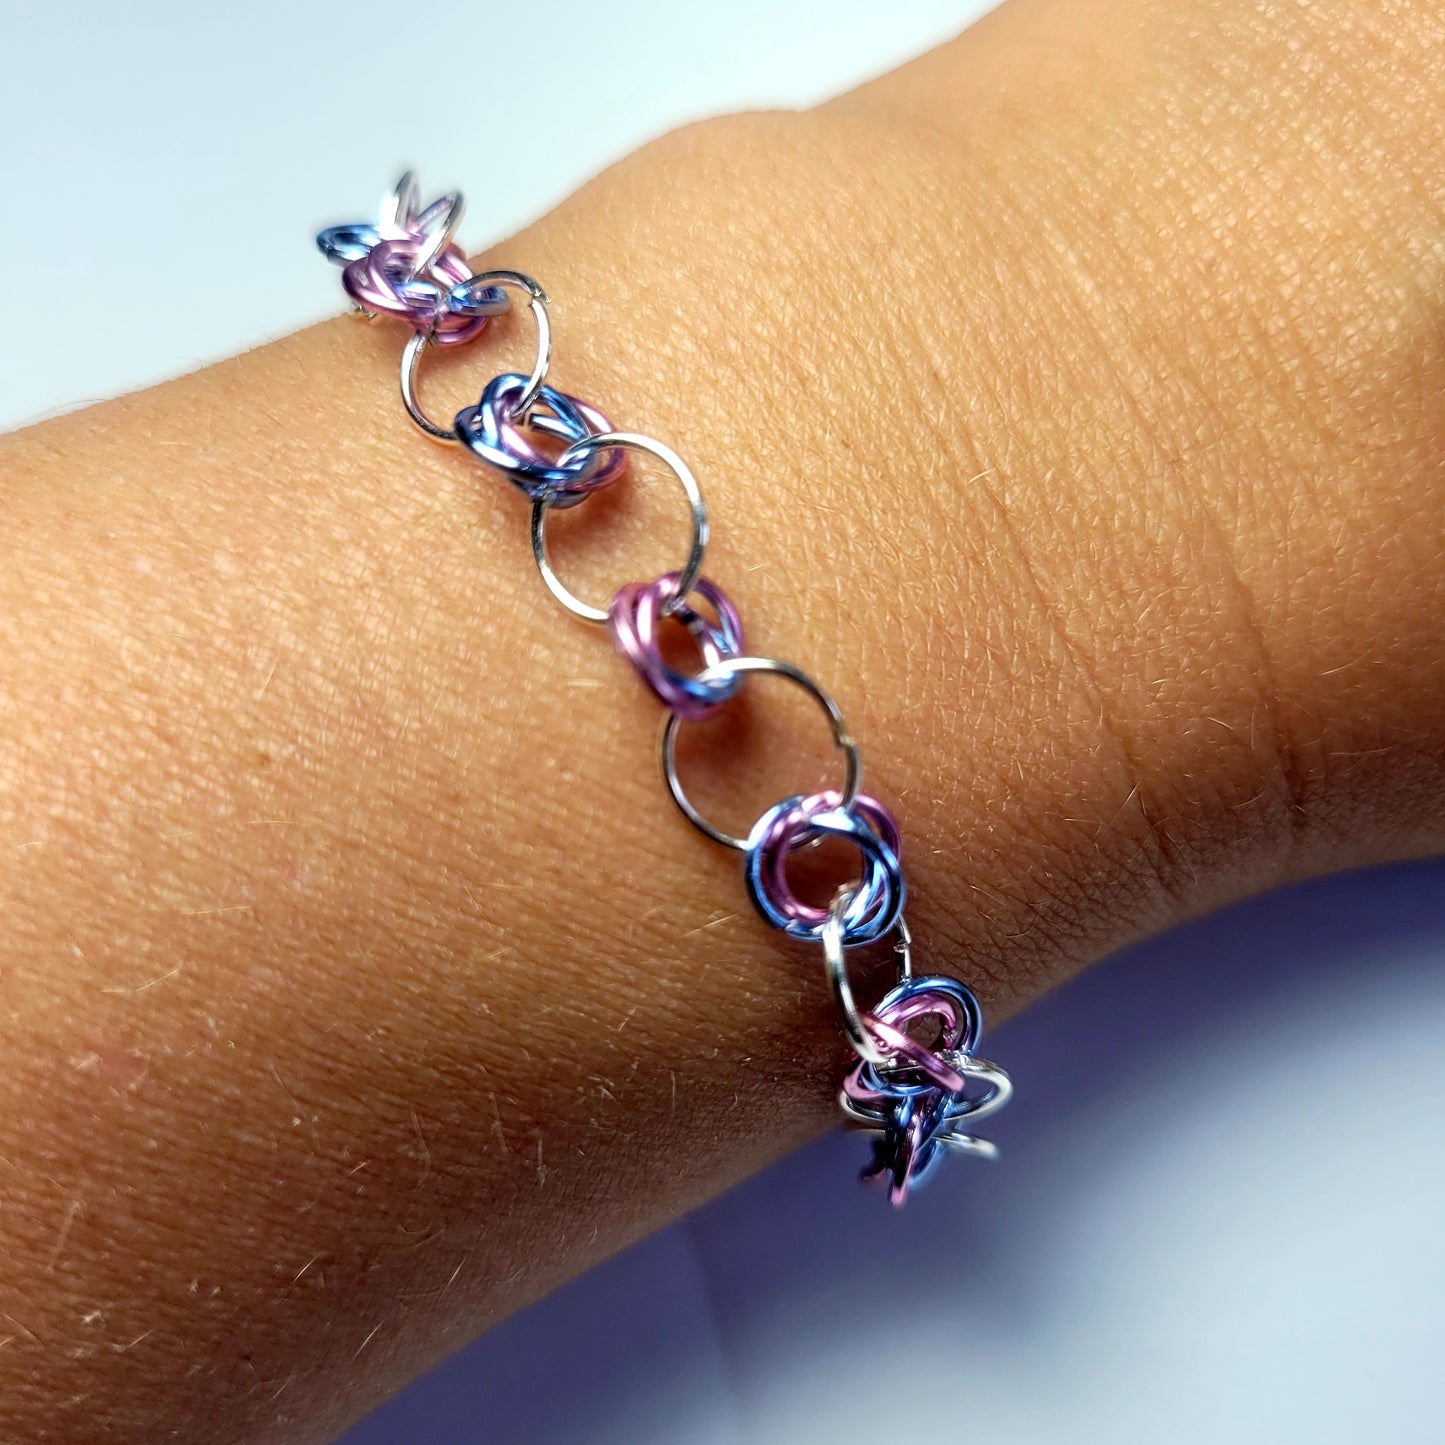 Bracelet, light pink, light blue and silver chainmail